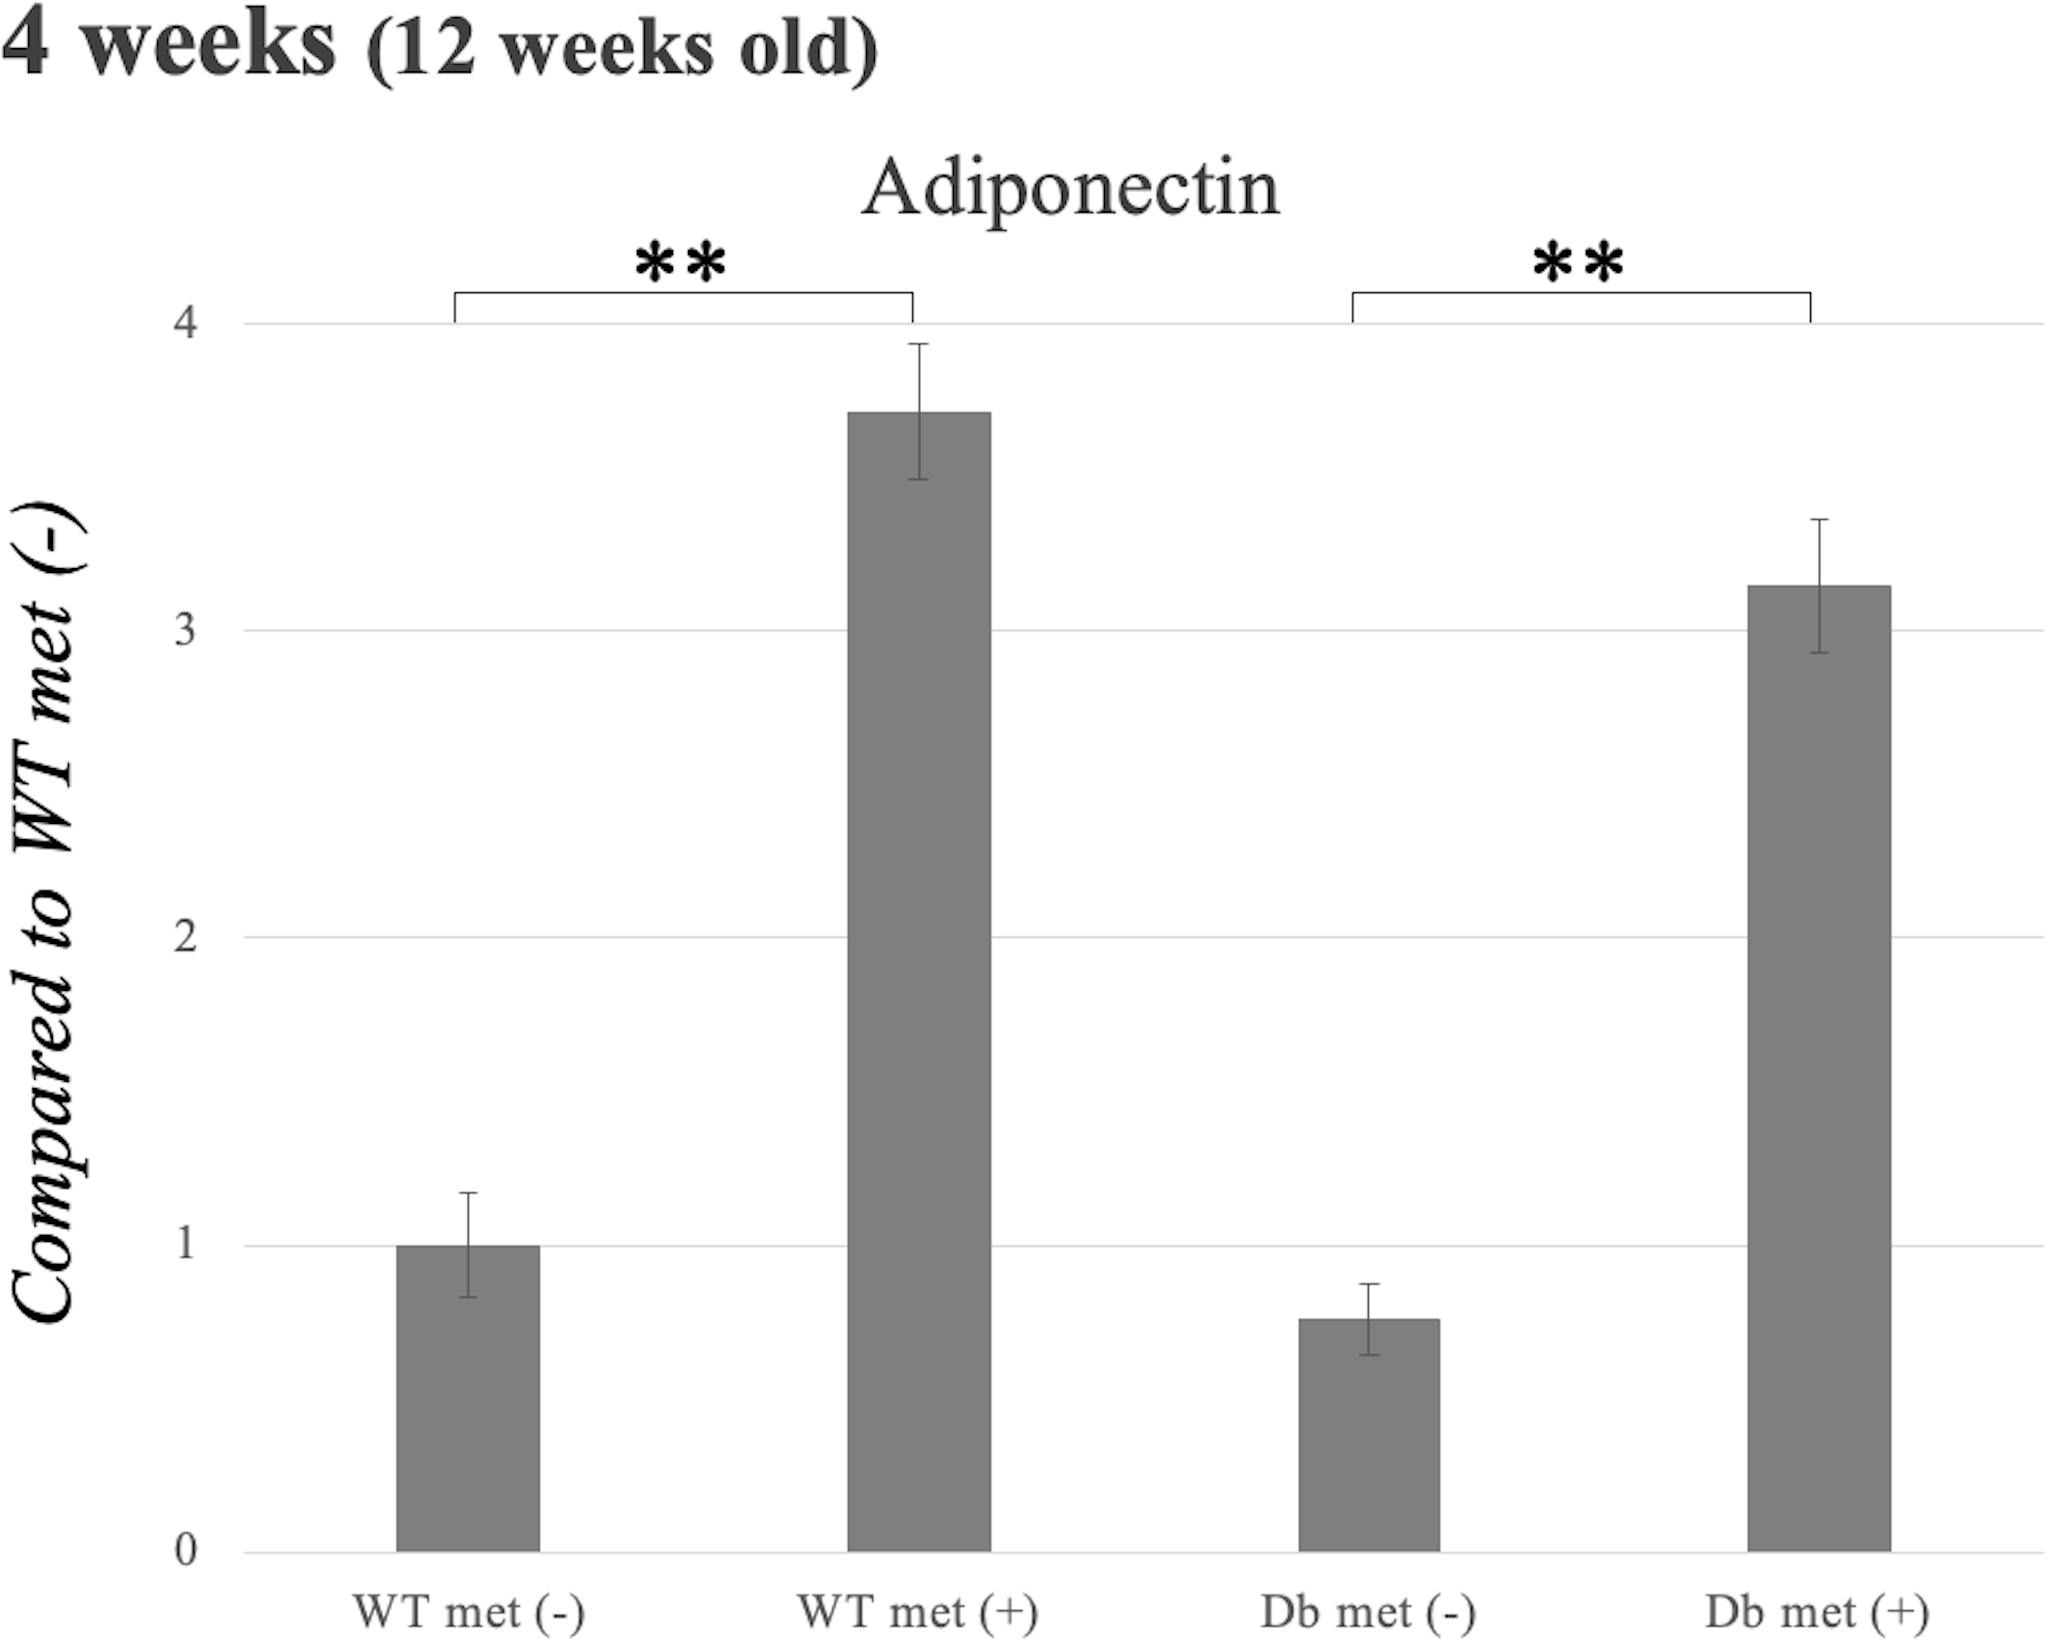 Fig. 6 
            In vivo expression analysis of adiponectin. The analysis was performed in vivo to determine the effect of metformin in visceral fats of wild-type (WT) and diabetic (Db) mice at four weeks of metformin treatment. Data are expressed as mean and standard error of the mean (SEM). *p < 0.05, **p < 0.01, one-way ANOVA with Tukey’s post-hoc analysis; n = 6.
          